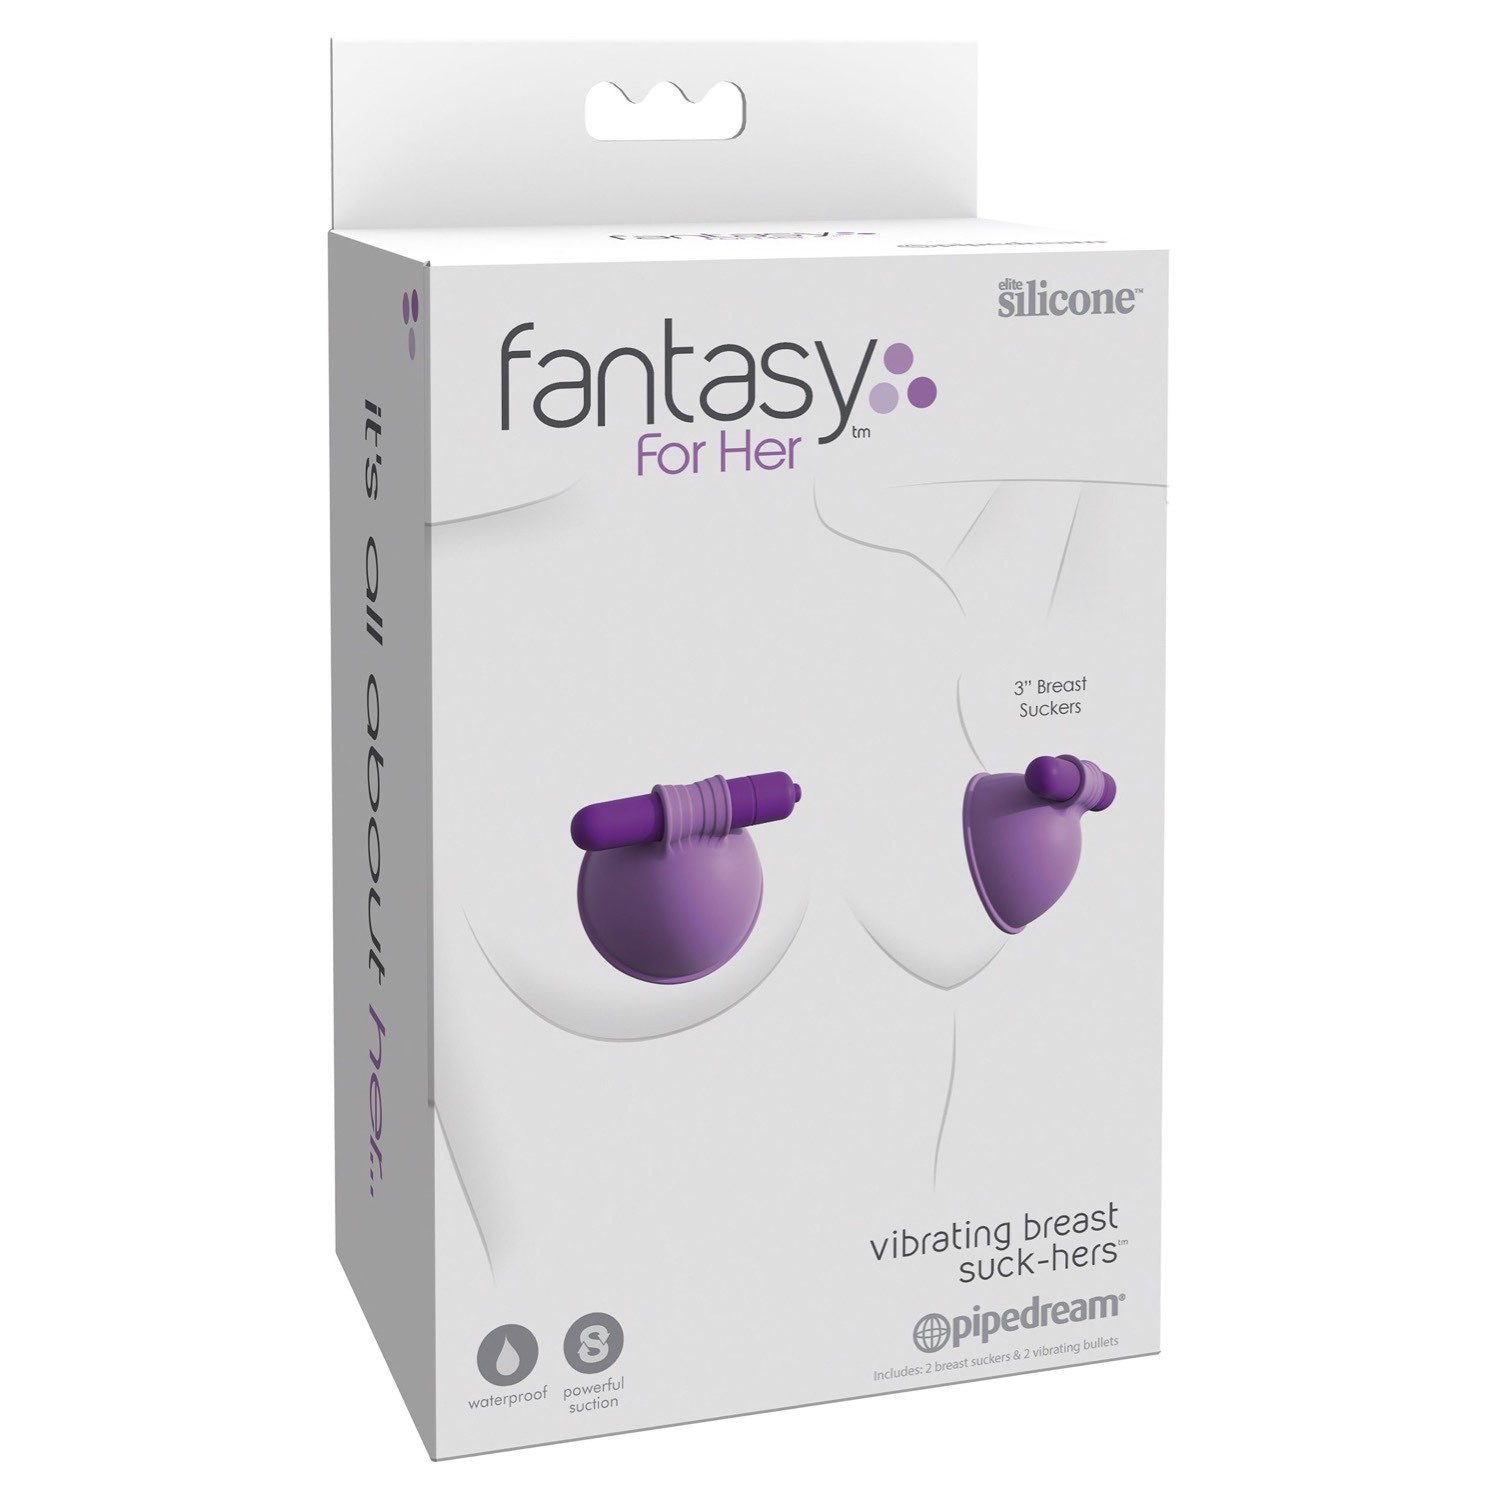 Fantasy For Her Vibrating Breast Suck-Hers - Purple 7 cm Vibrating Breast Suckers - Set of 2 by Pipedream